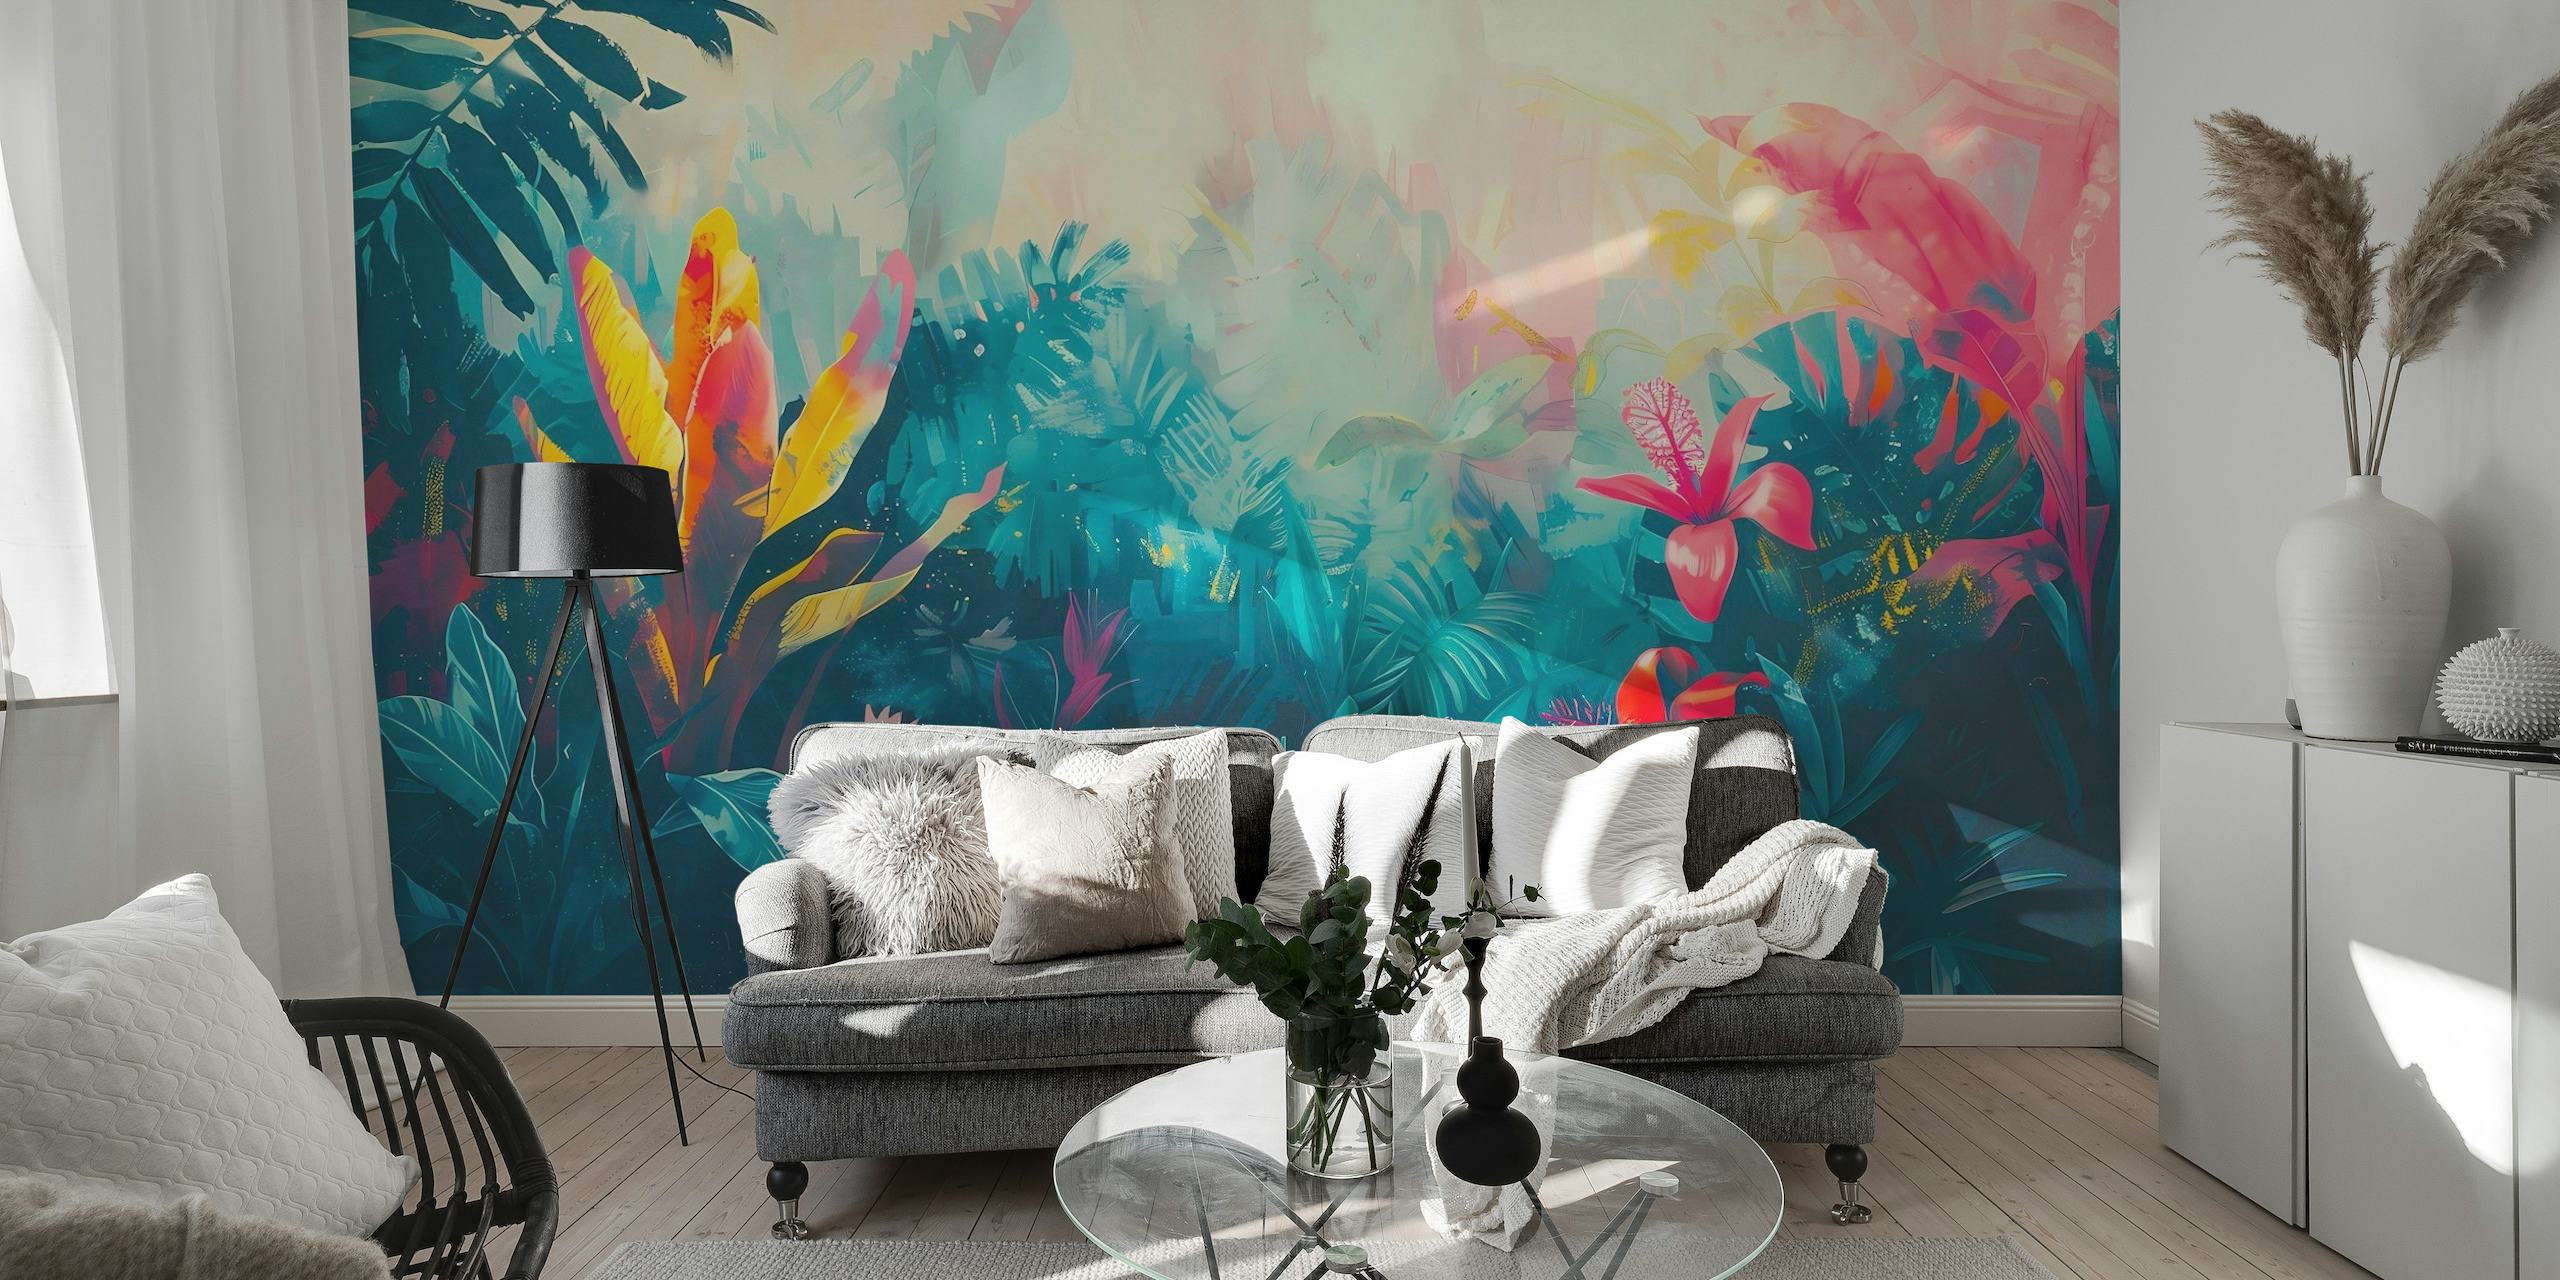 Colorful and vivid tropical garden wall mural with lush foliage and blooming flowers